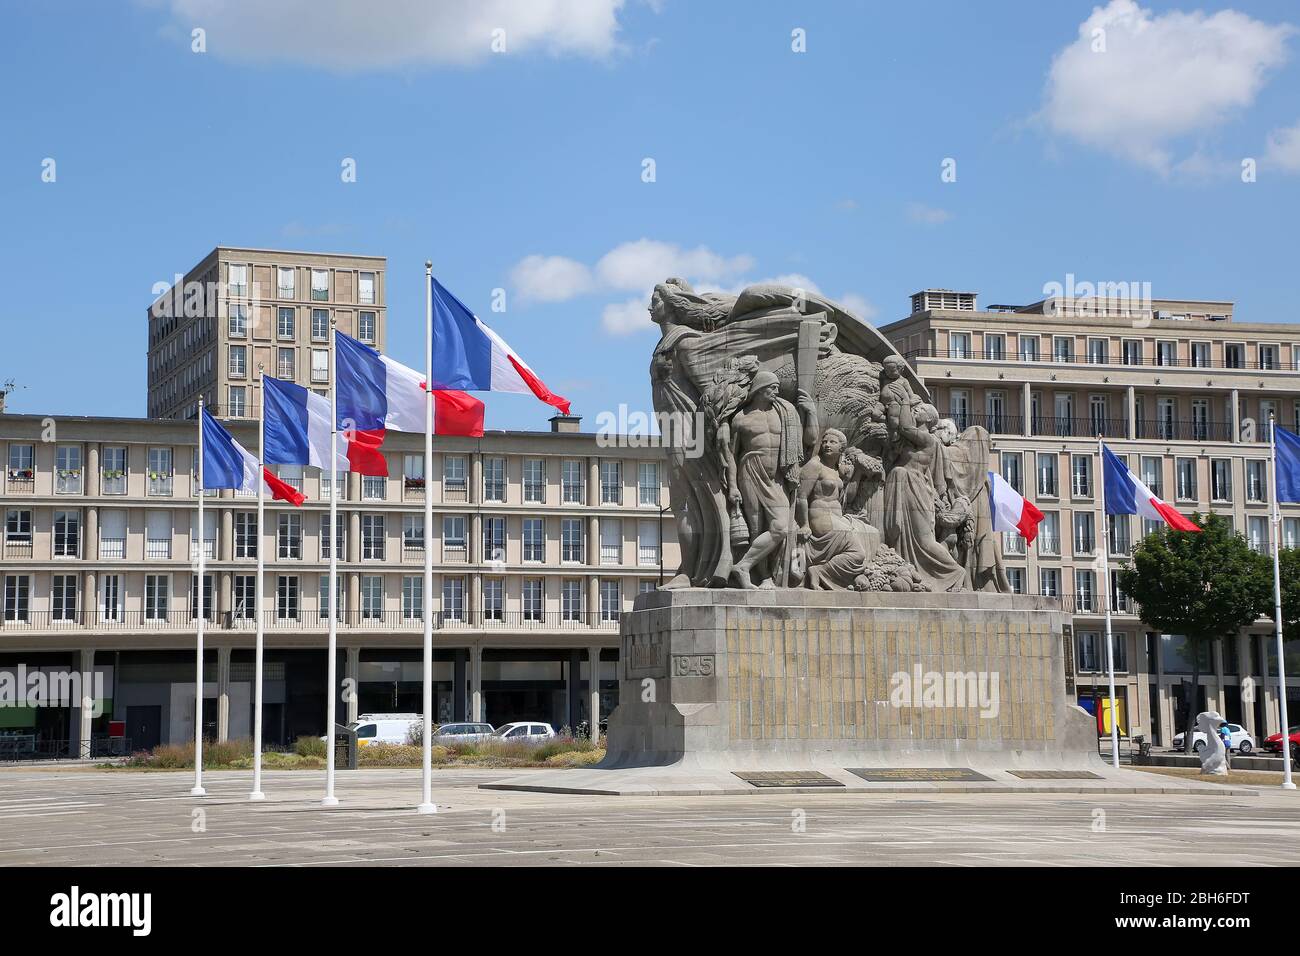 Monuments aux Morts is a monument to honor all civilians who died in the wars. It is surrounded by french flags, Le Havre, Normandy, France. Stock Photo